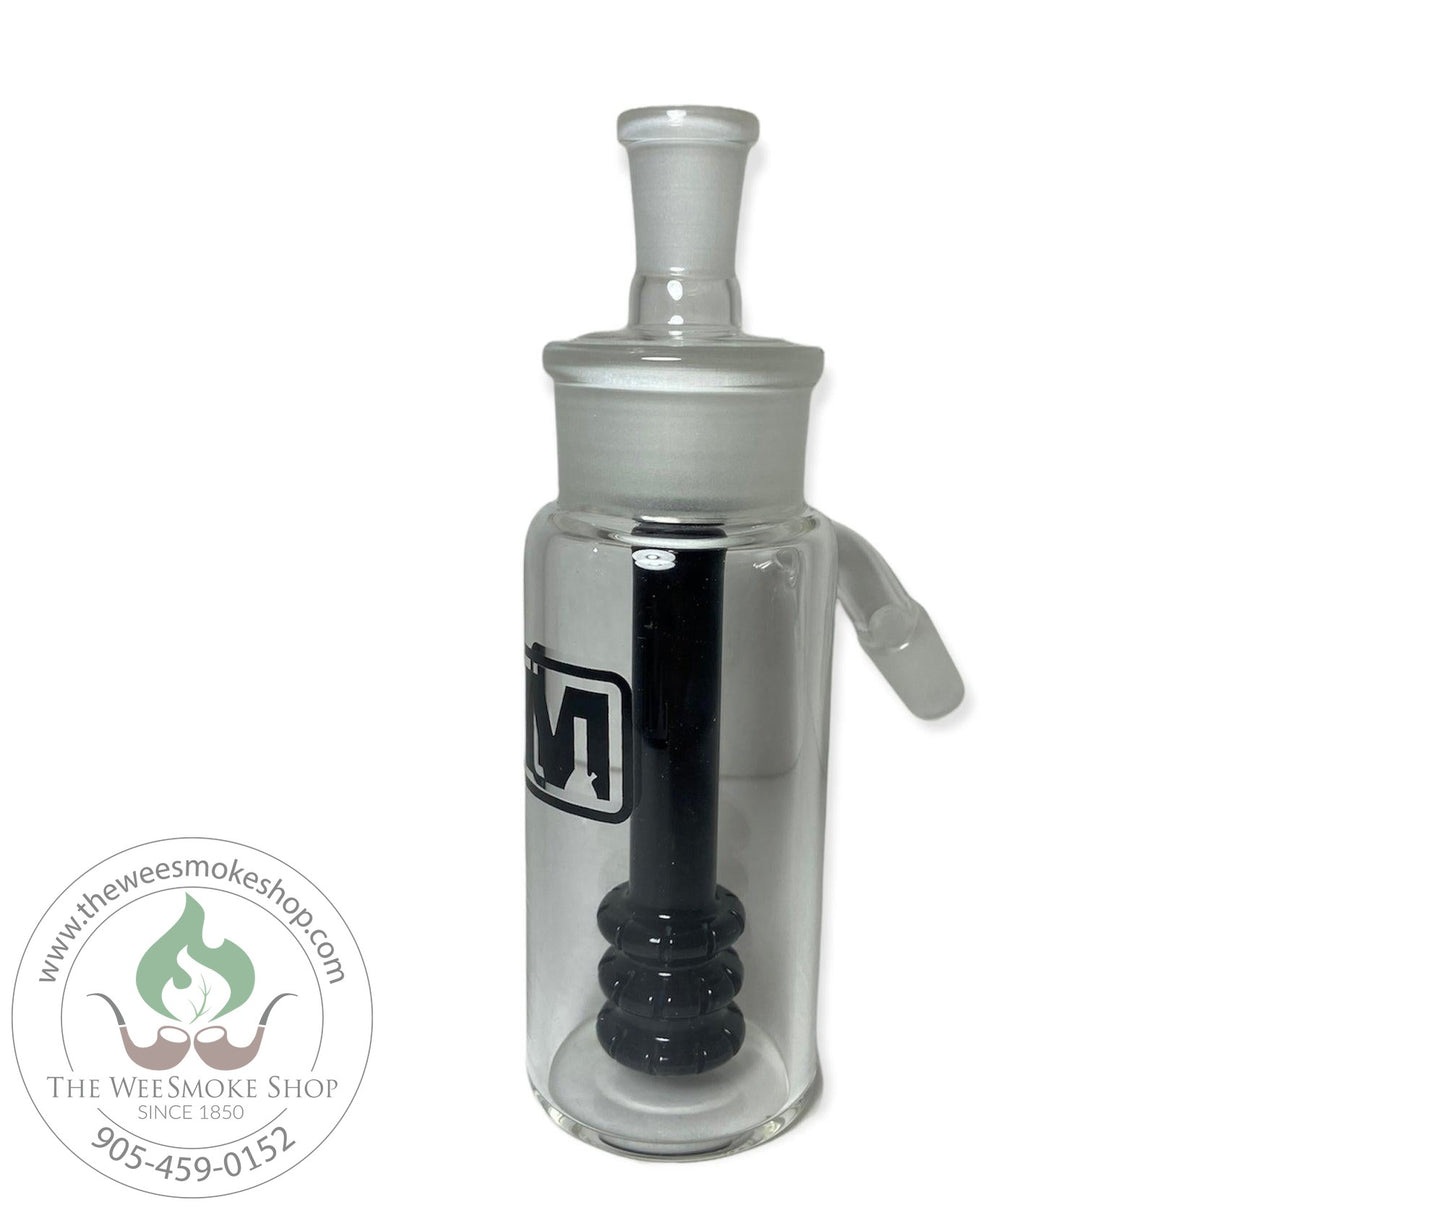 Marley 14mm Removable Perc Ash Catcher (45 Degree)-Black-Ash Catcher-The Wee Smoke Shop